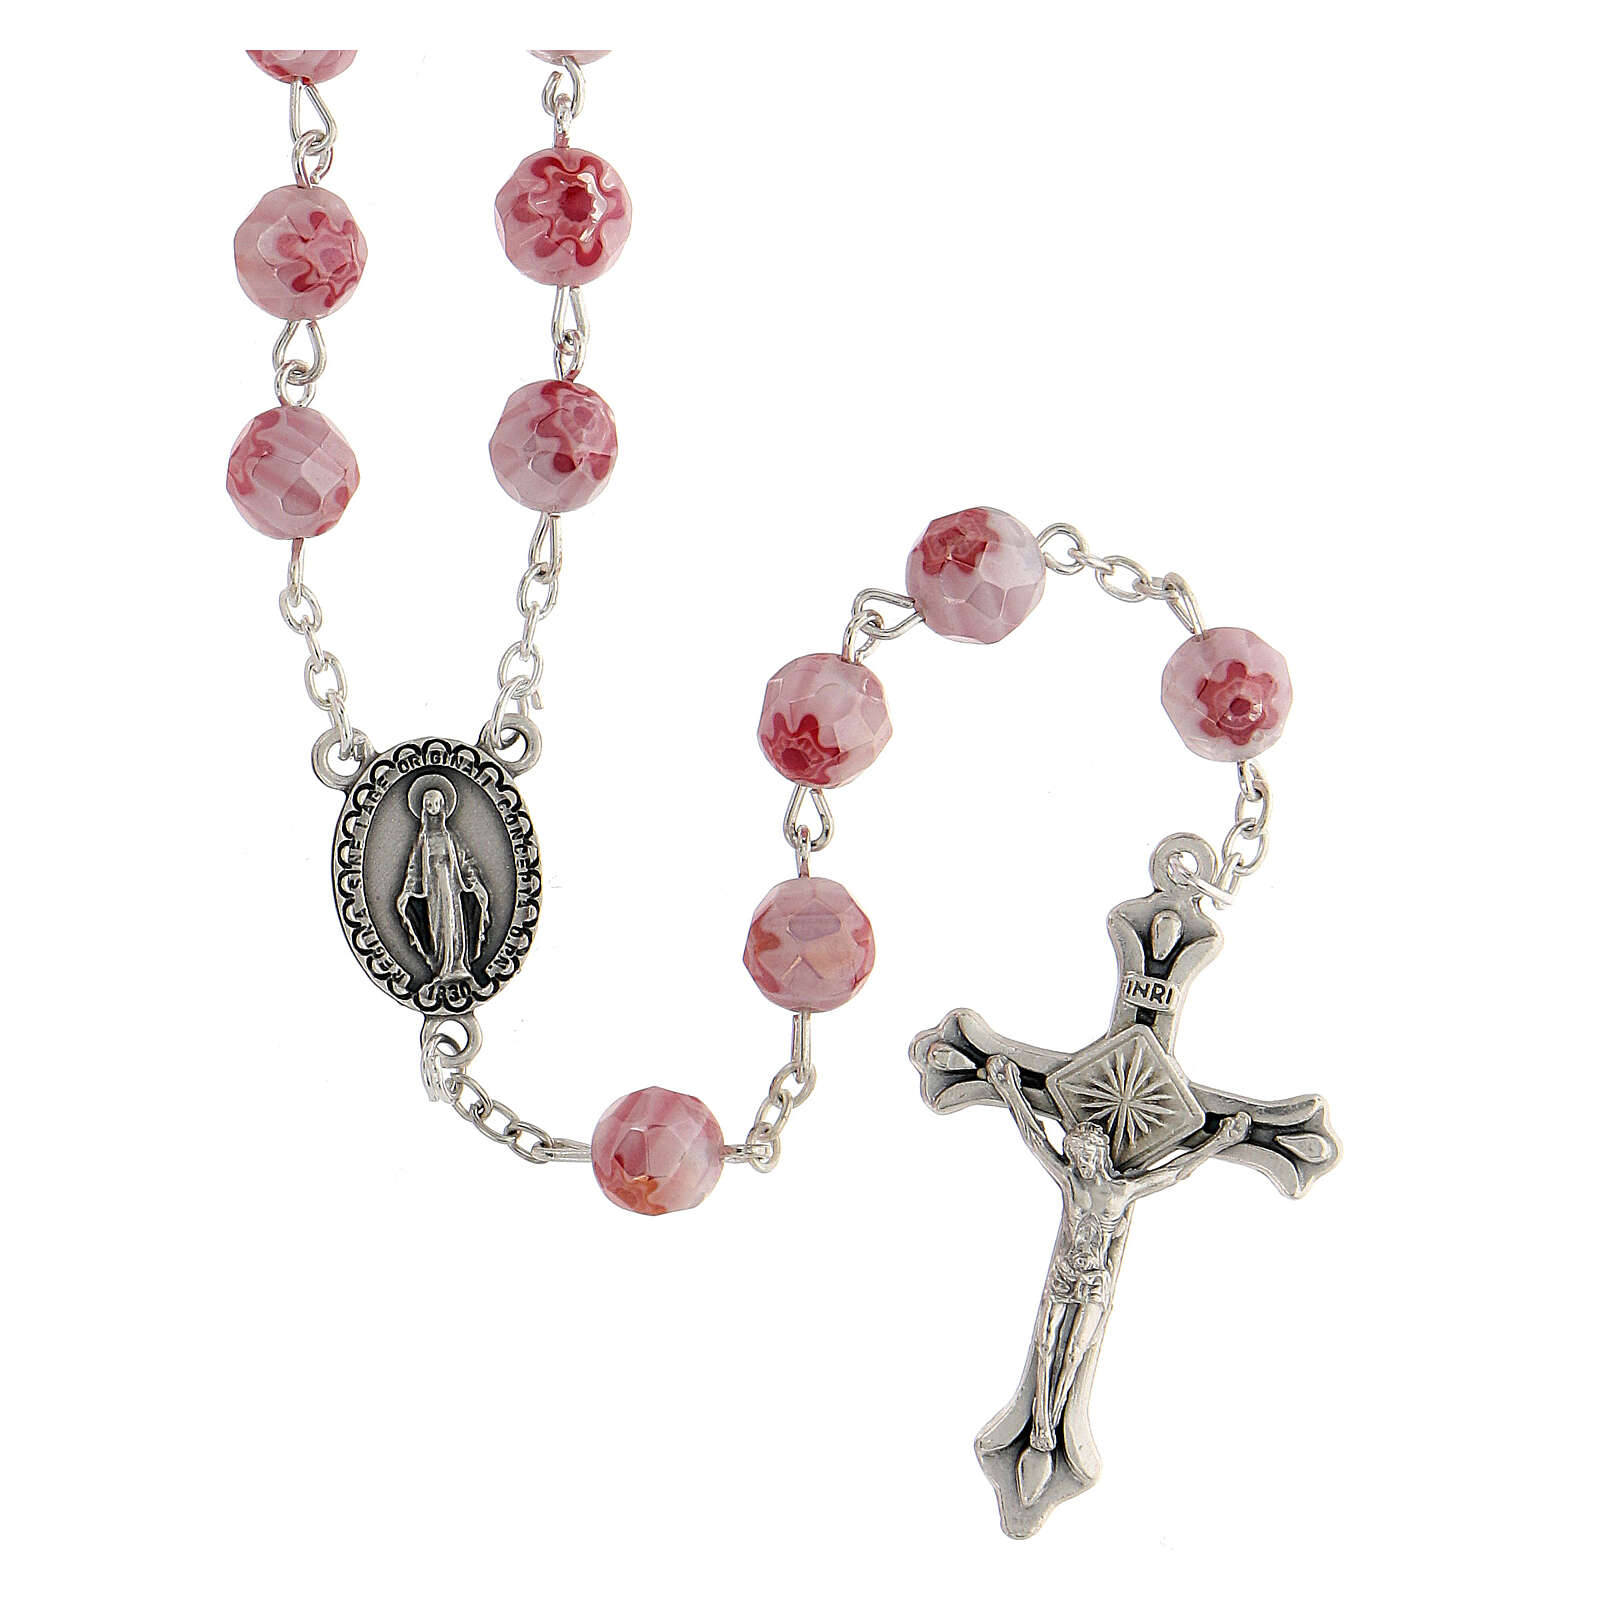 Rosary beads with pink crystals like murrina 8 mm | online sales on ...